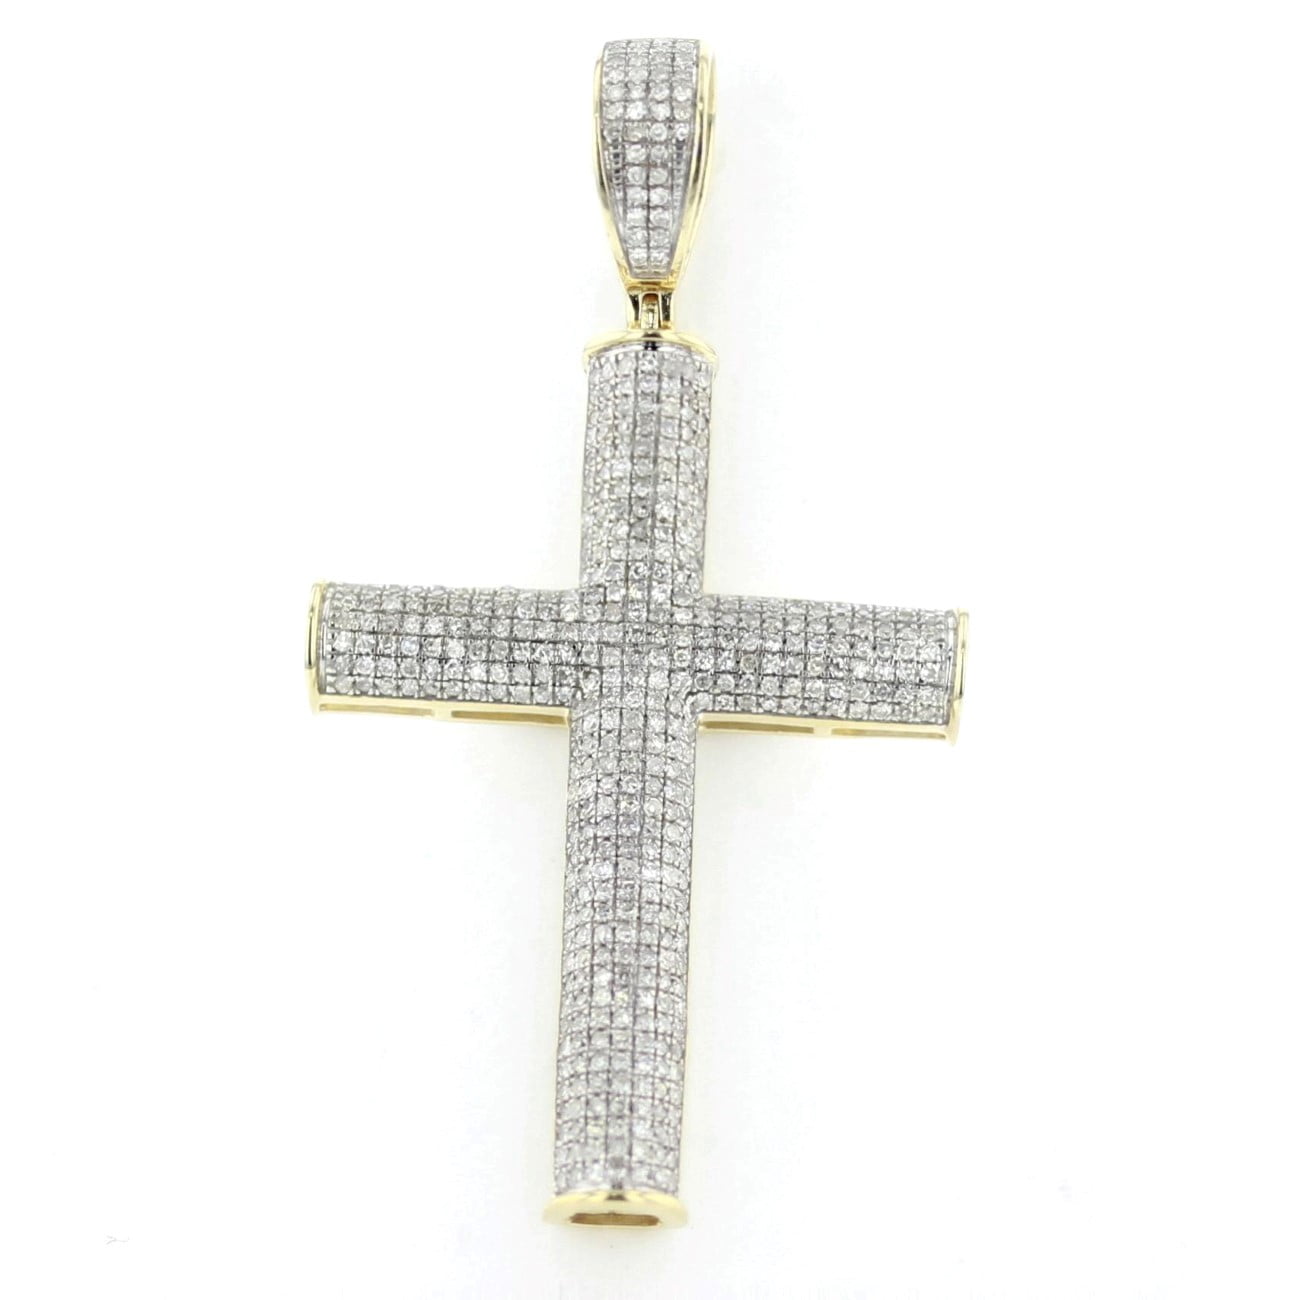 10K Gold Cross Pendant Diamond Iced Out Domed Mens Charm 52mm Tall 1 ...